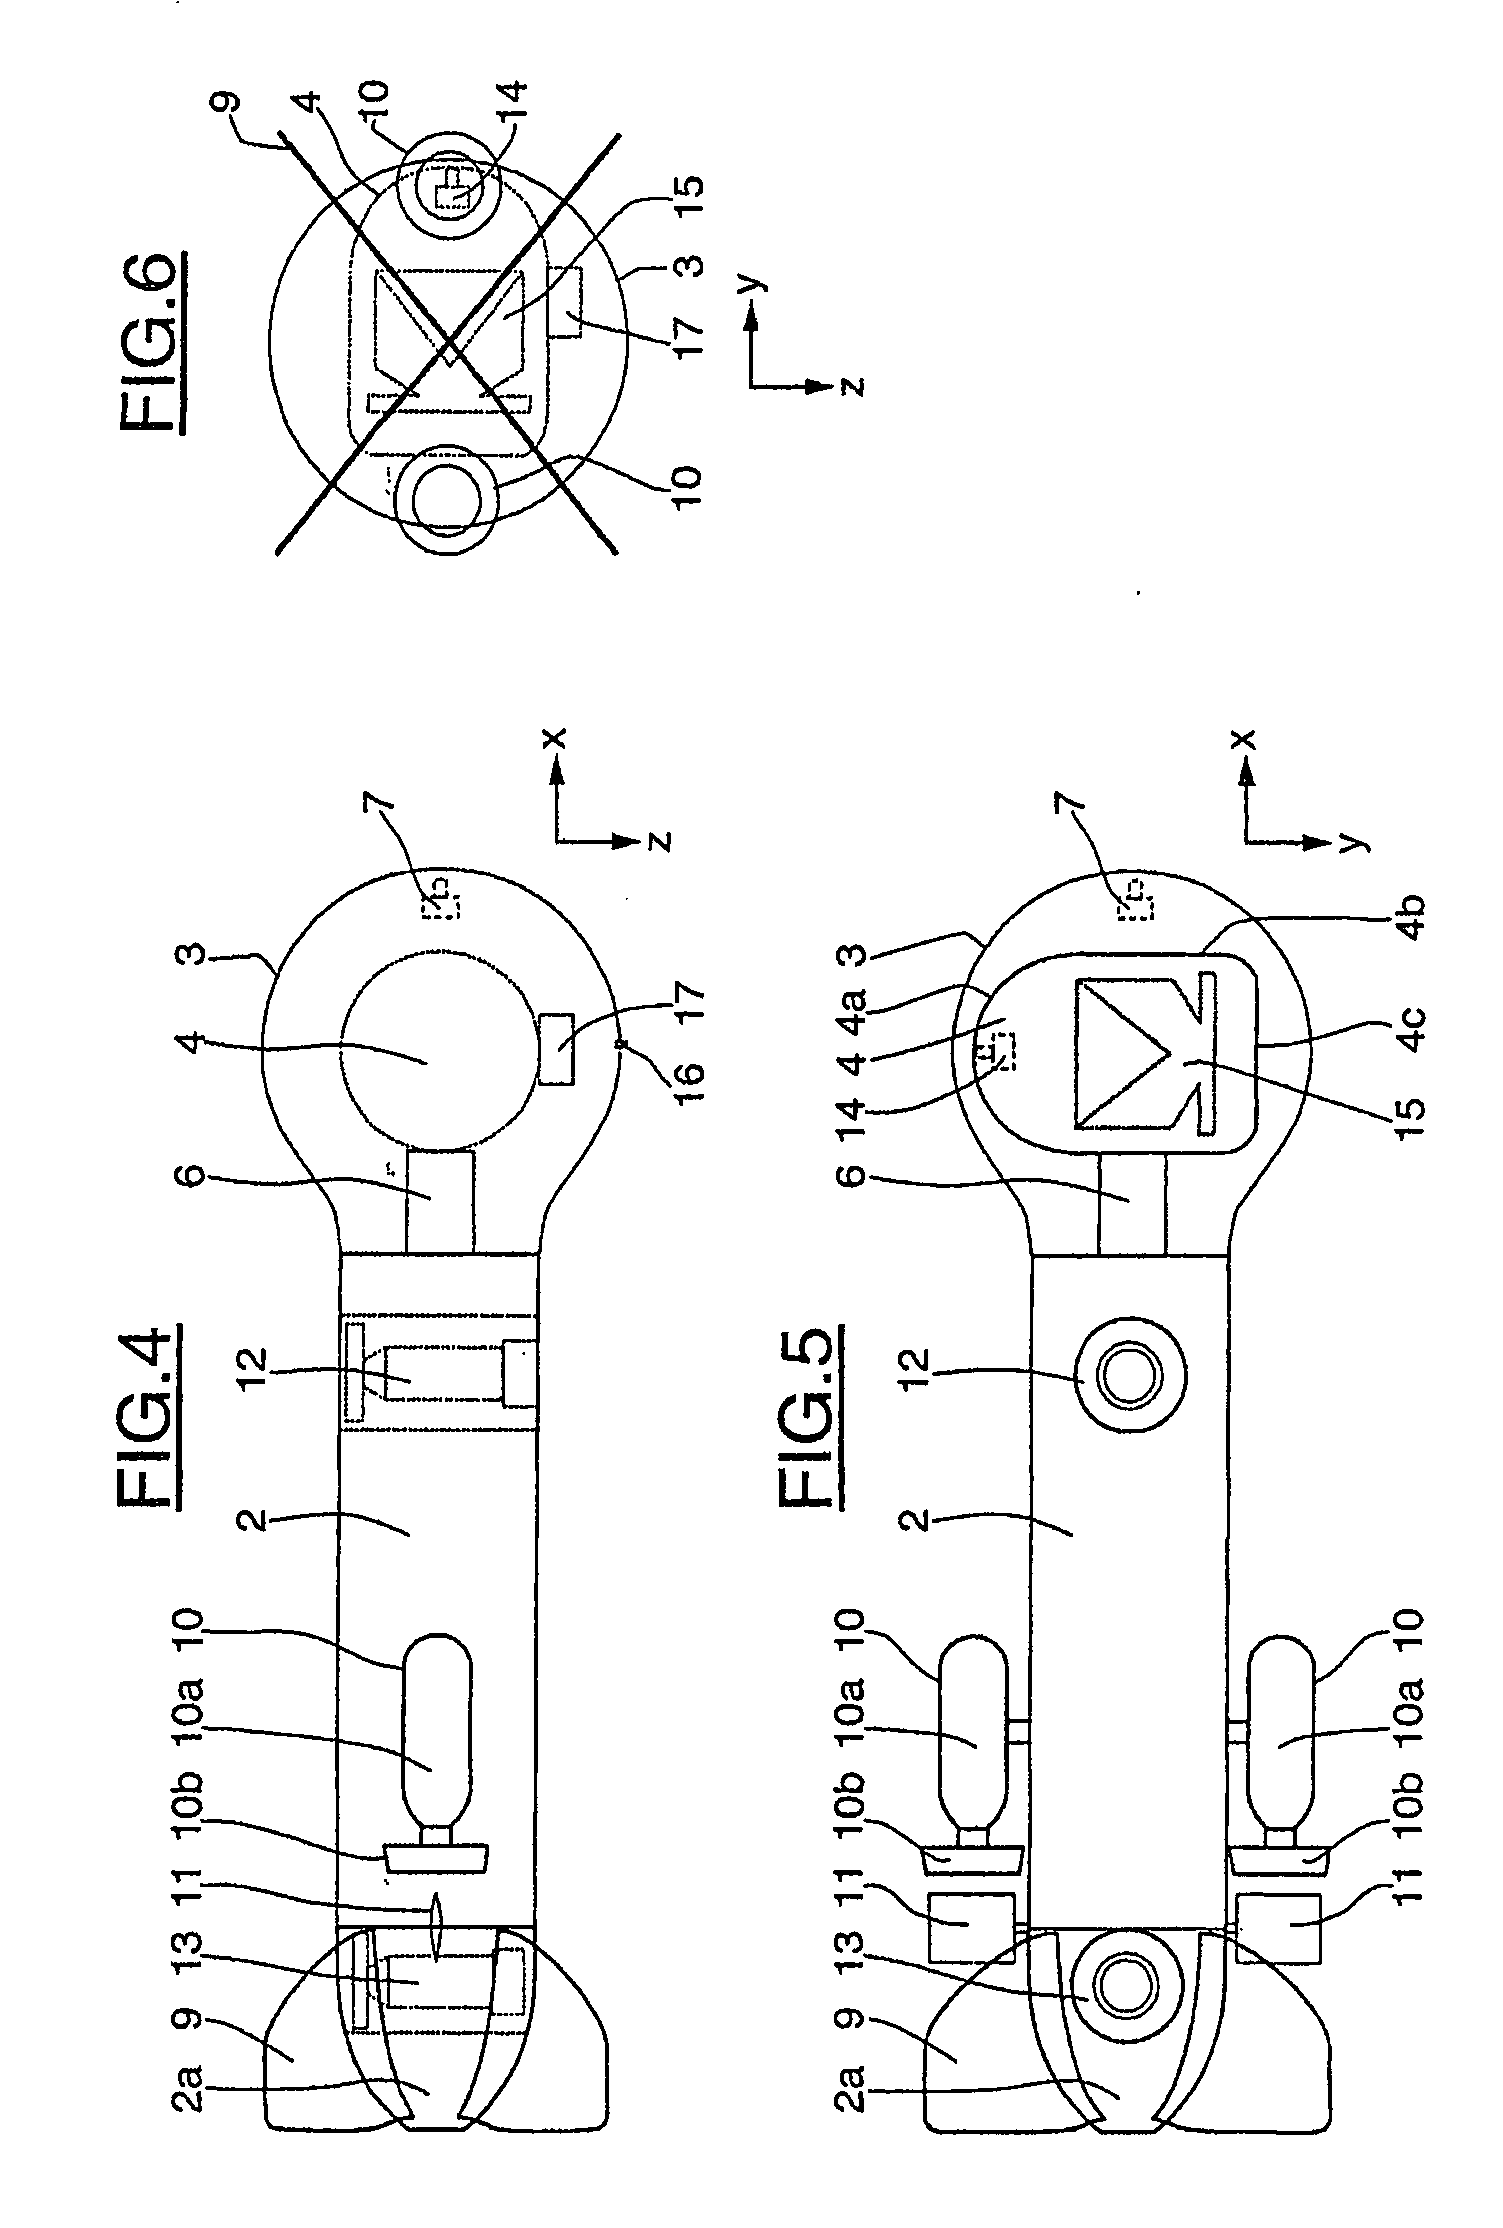 Device for Distroying Subsea or Floating Objects